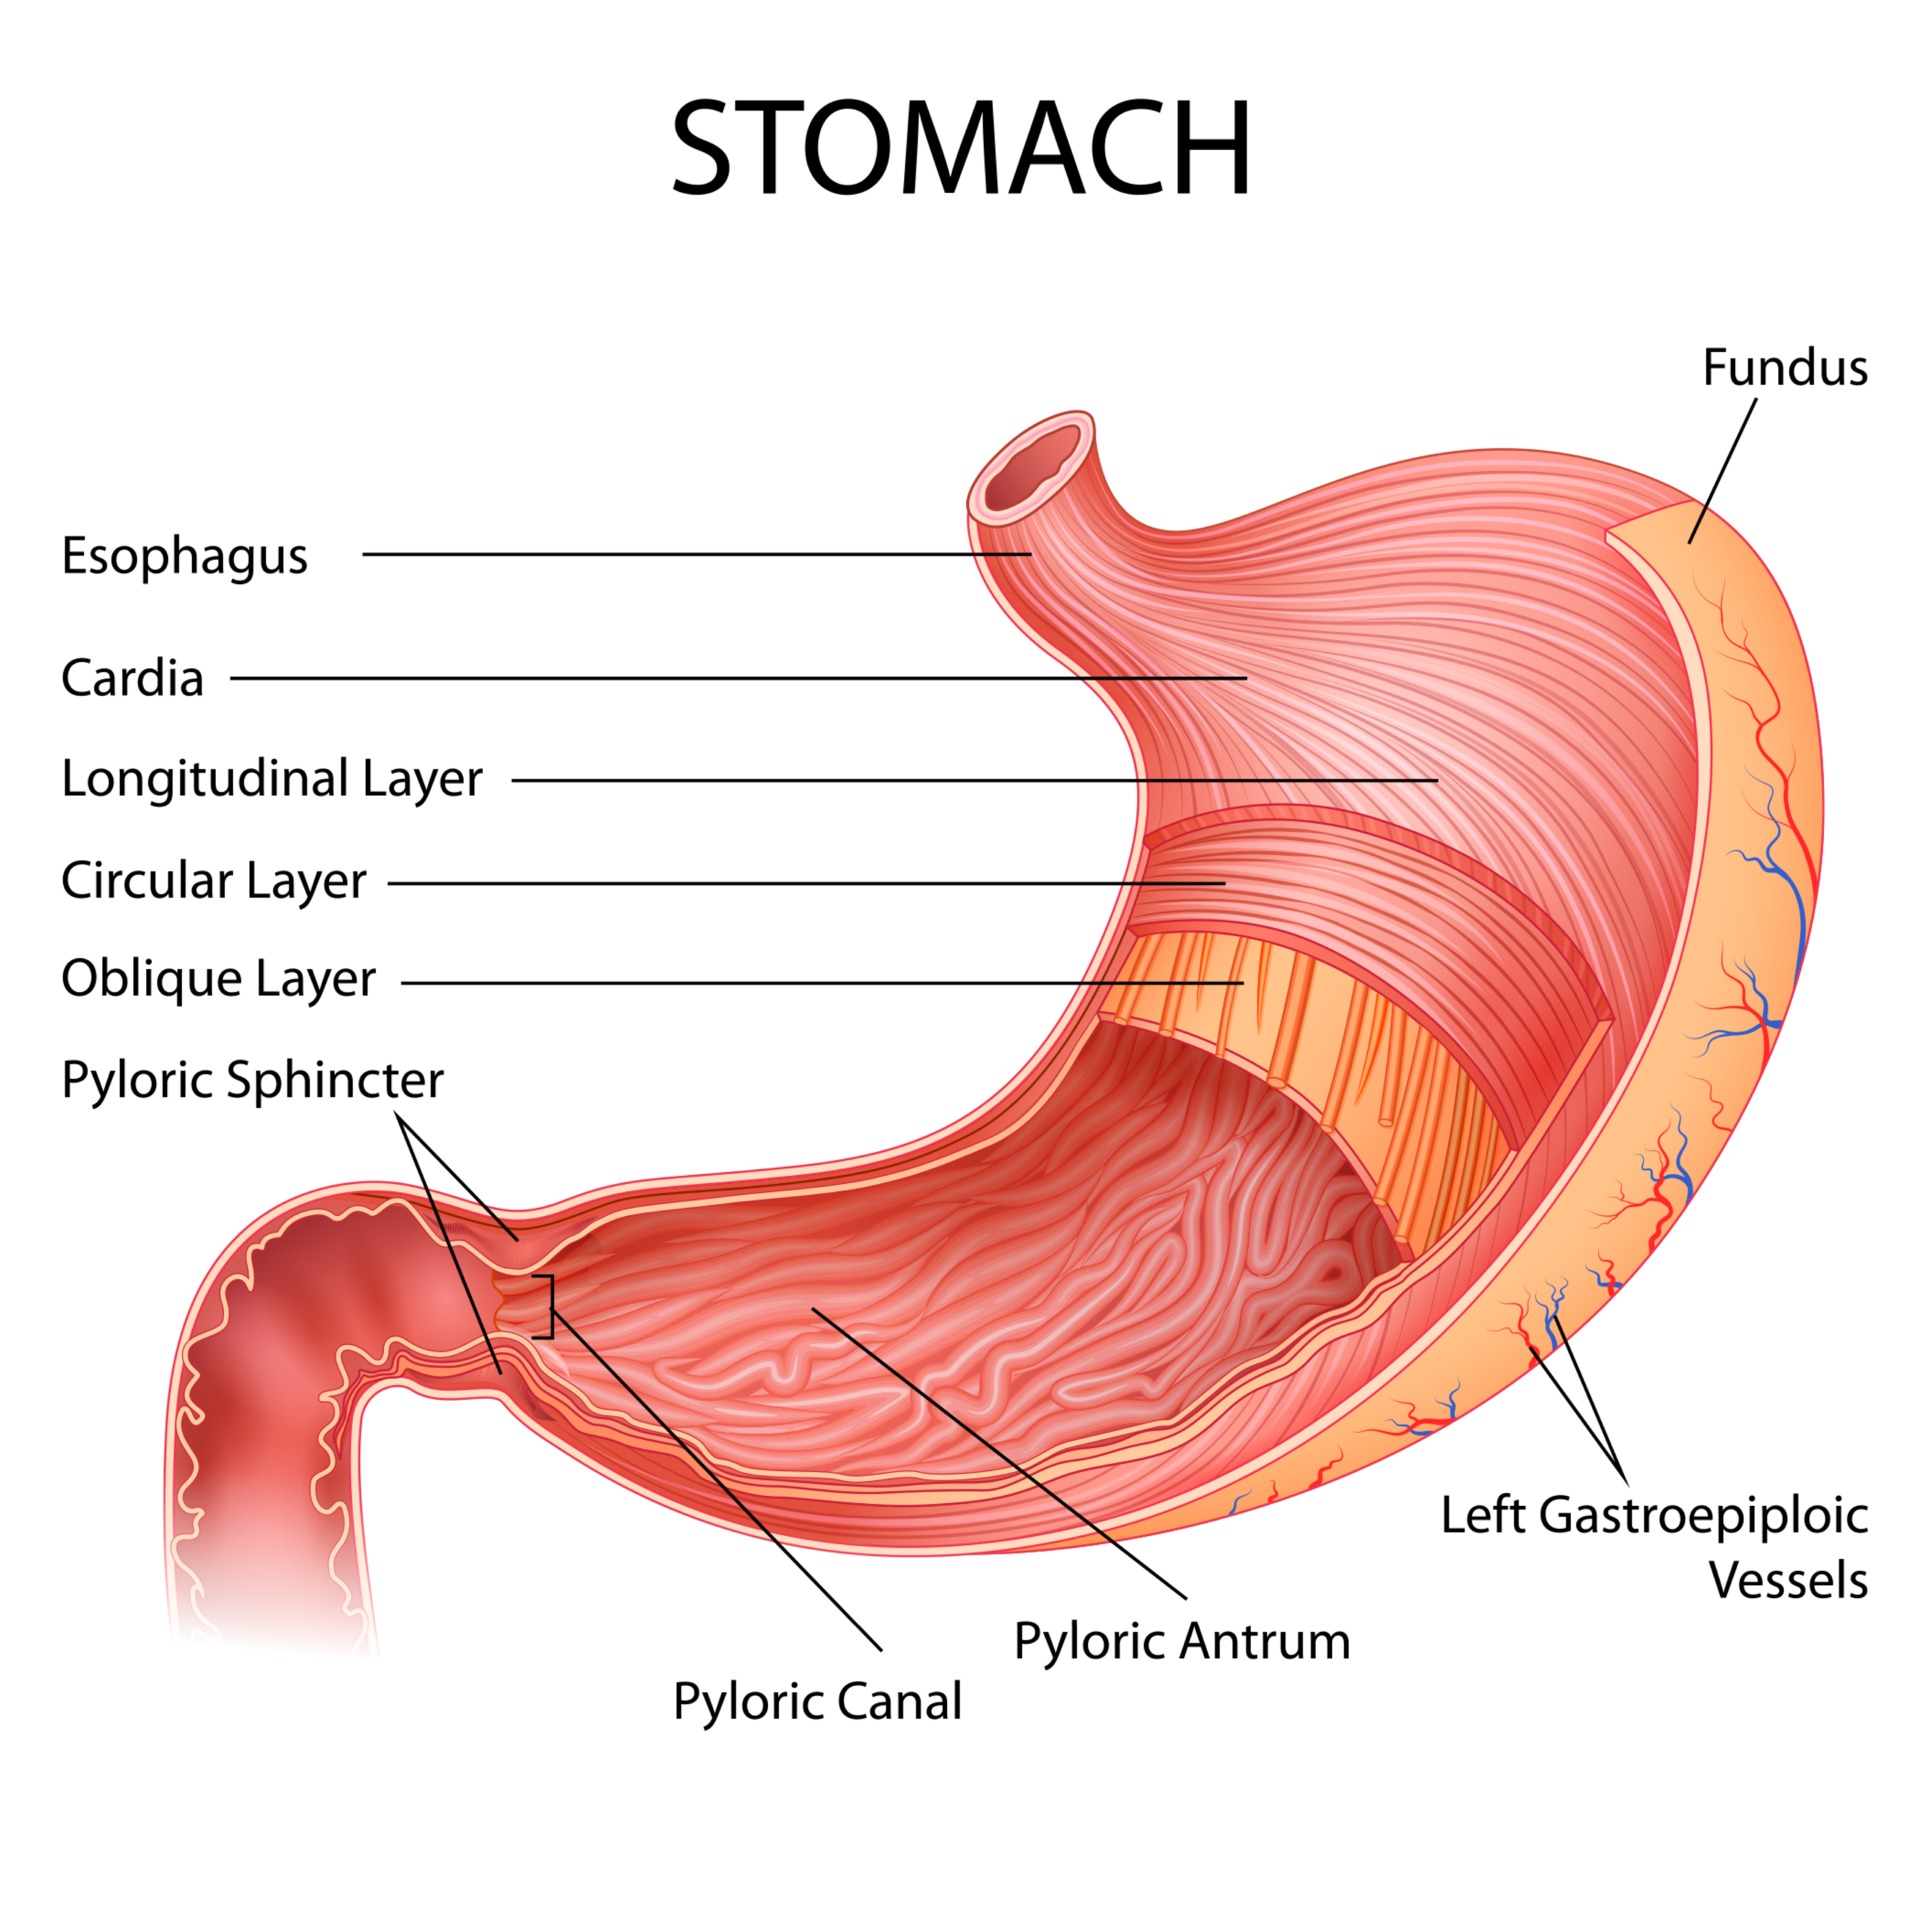 16296 Stomach Drawing Images Stock Photos  Vectors  Shutterstock